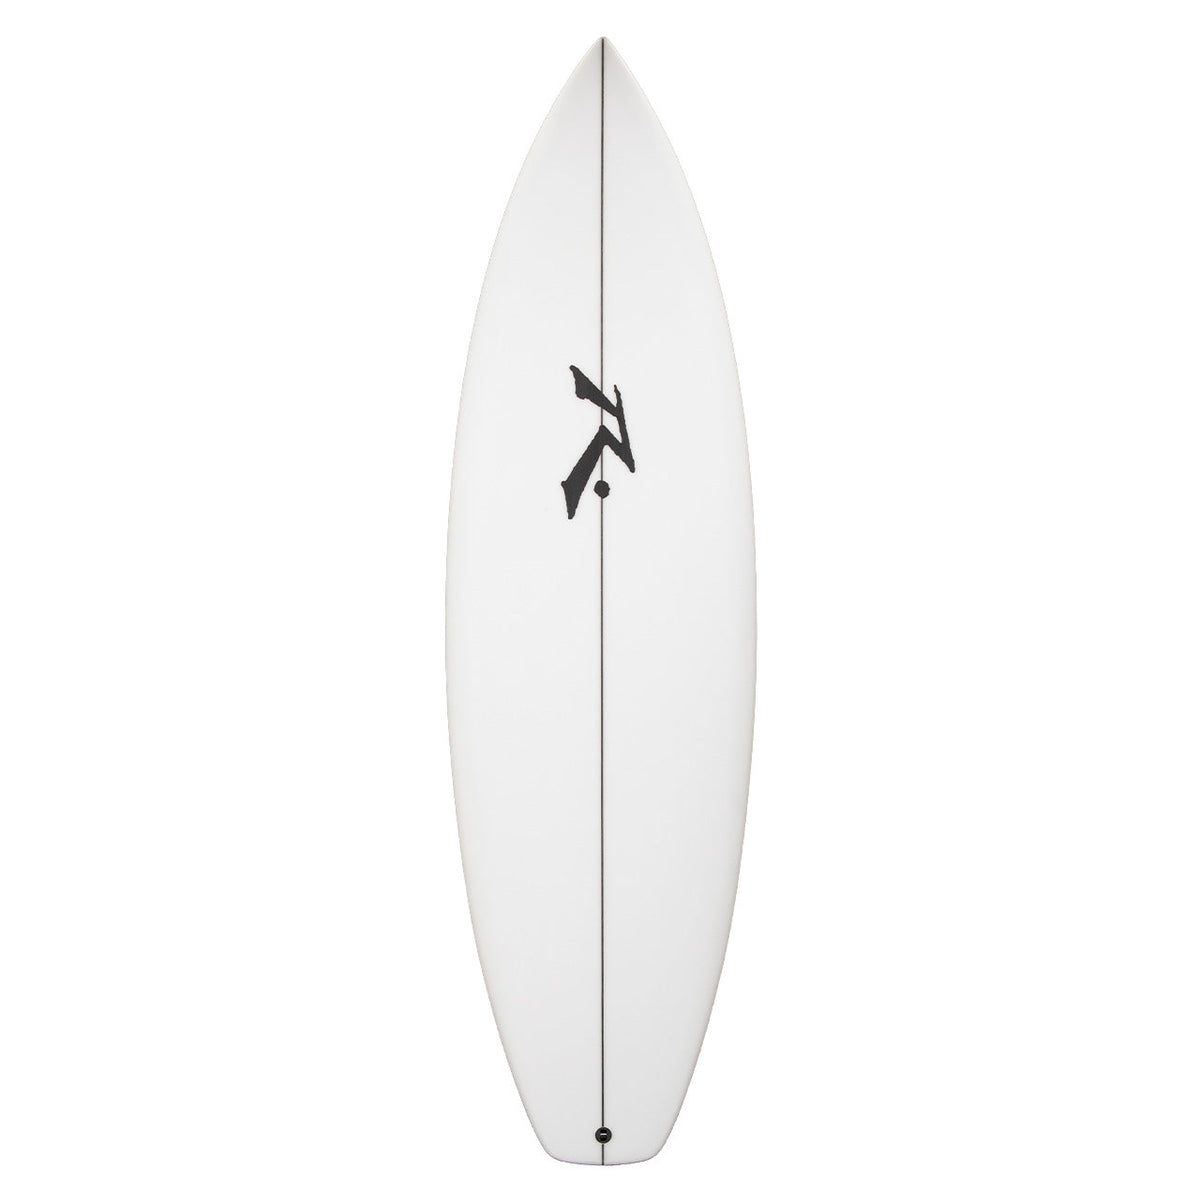 The Keg - High Performance Shortboard - In Stock - Deck View - Rusty Surfboards